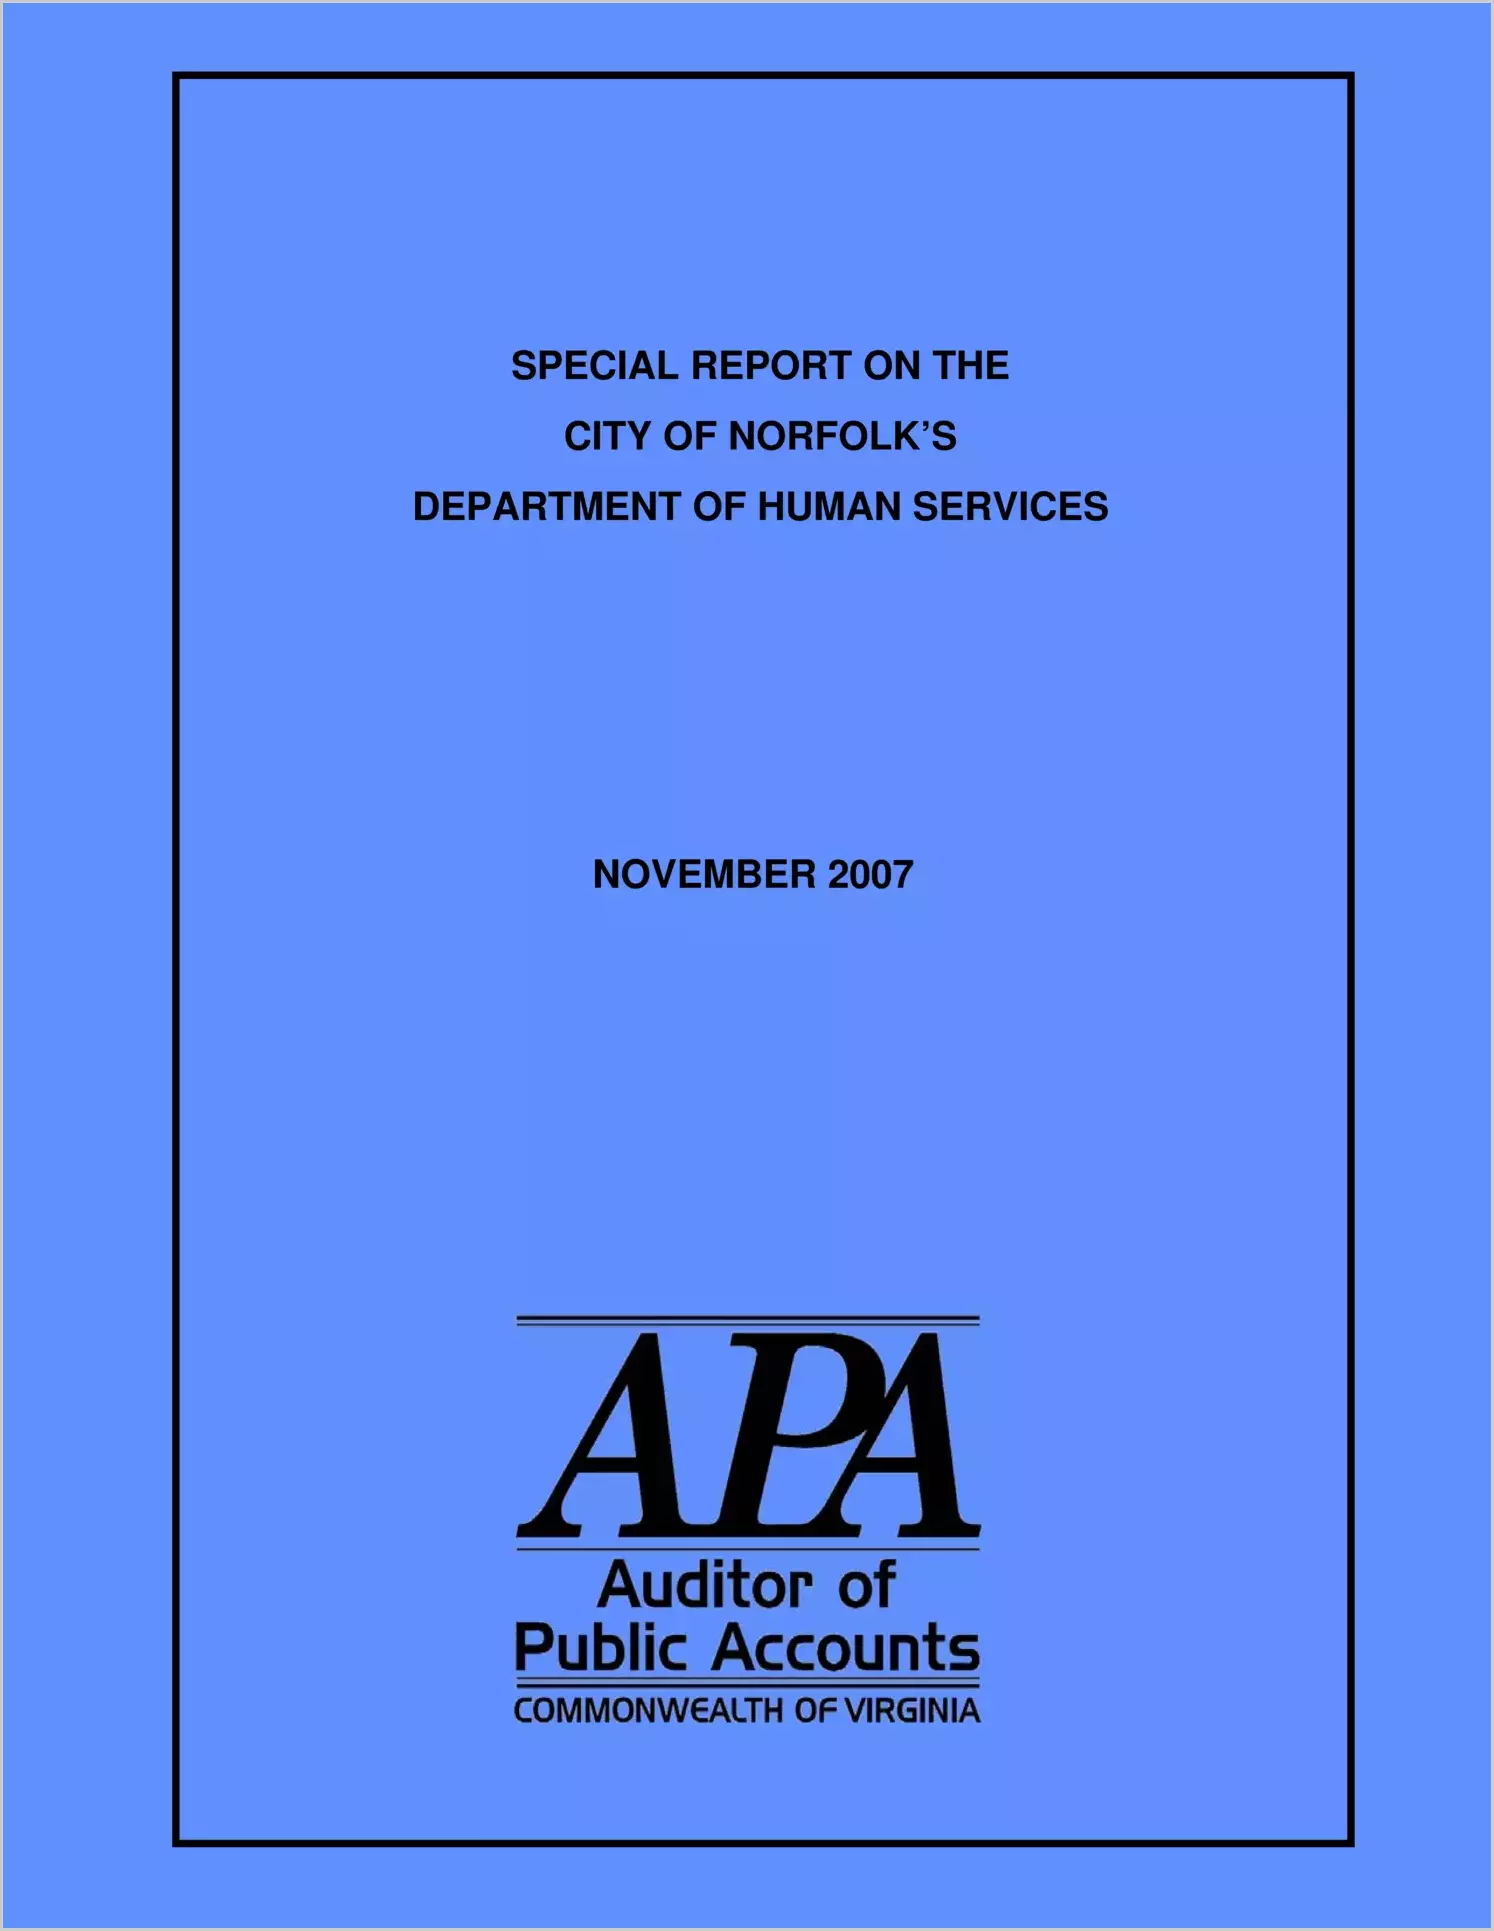 Special Report on the City of Norfolks Department of Human Services (Report Date:November 2007)